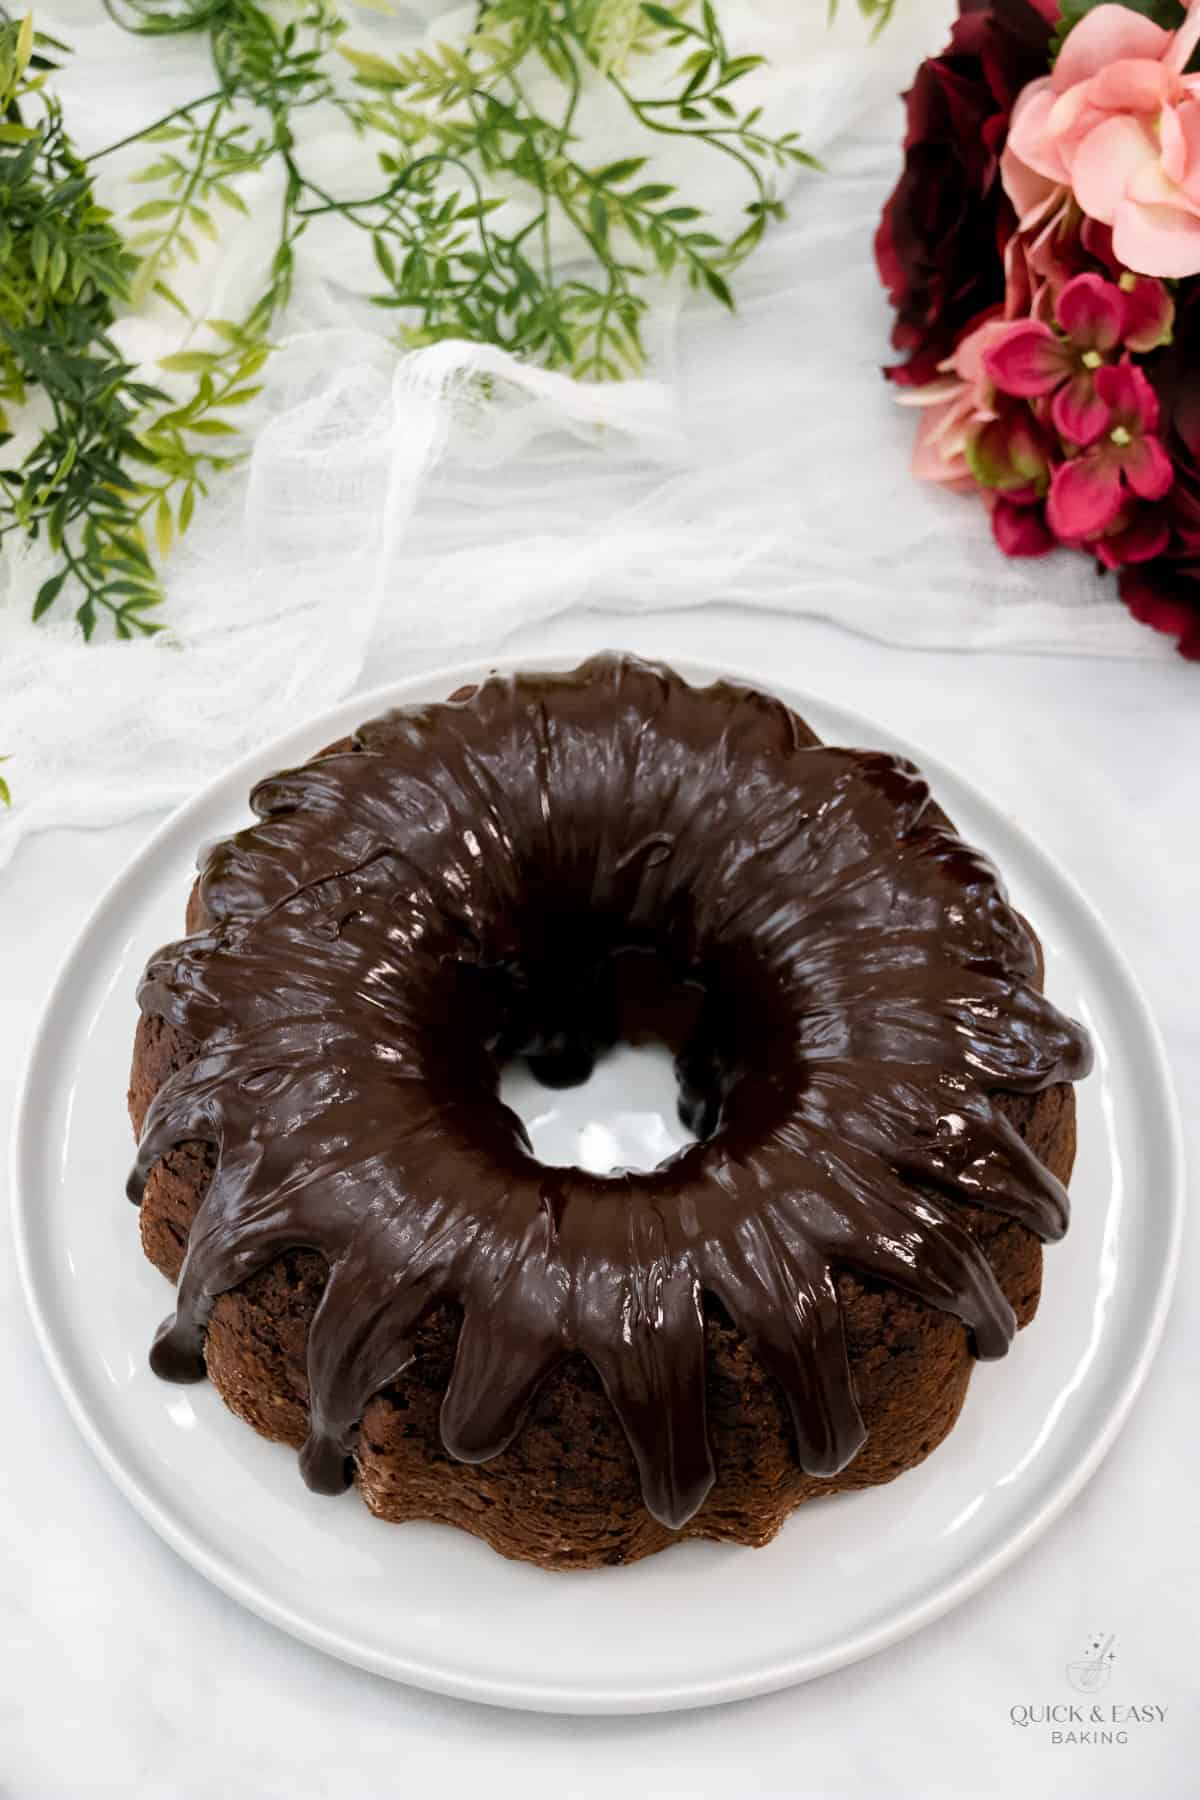 Top view of chocolate cake with chocolate glaze poured on top.